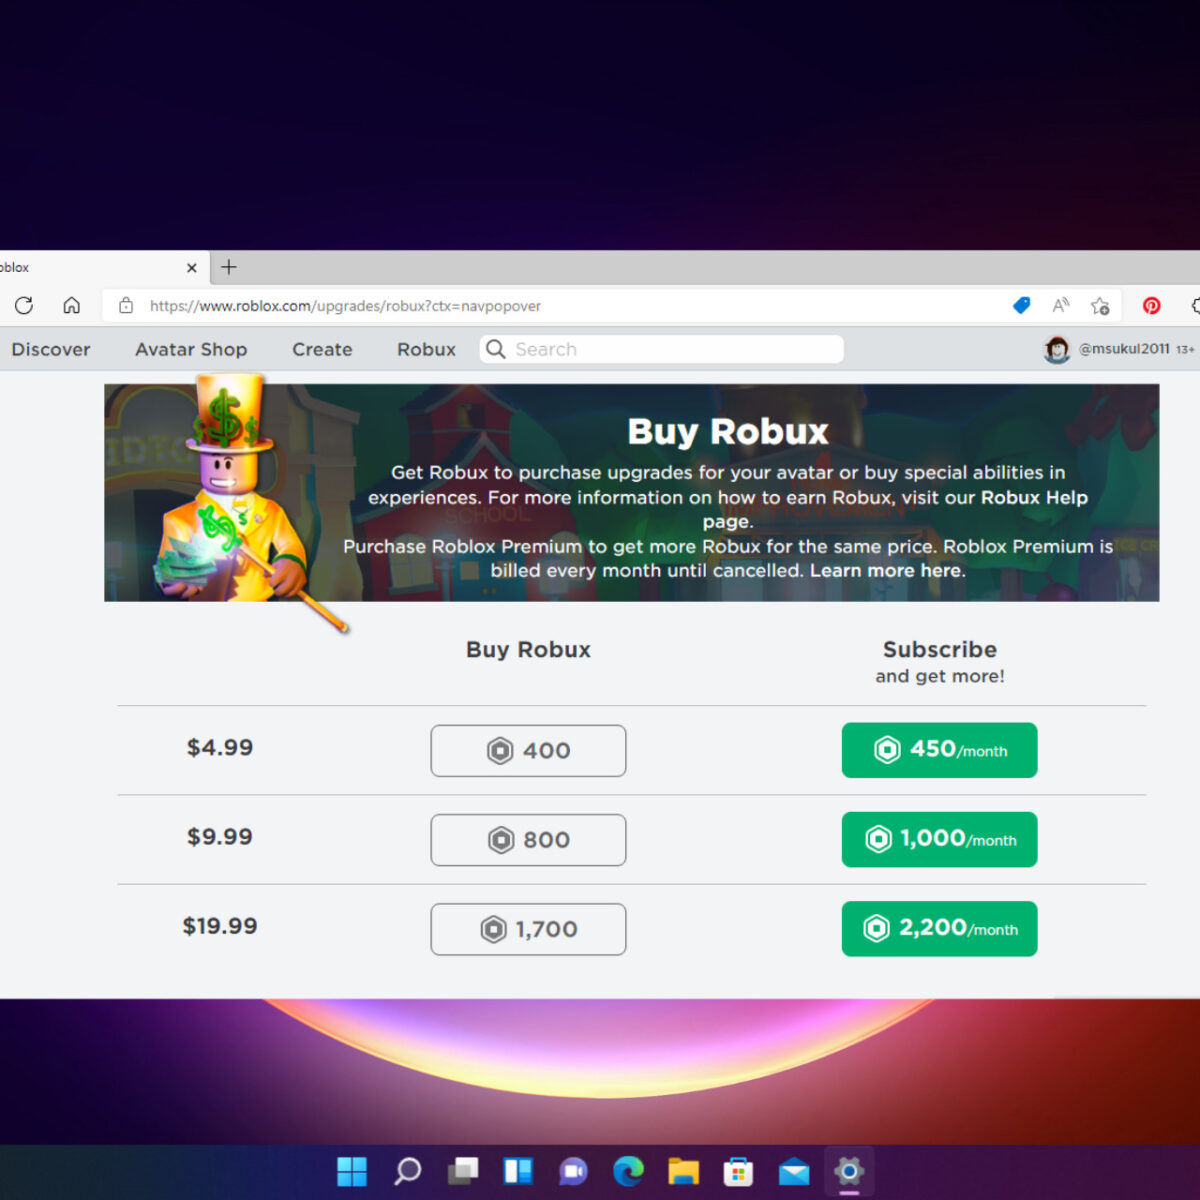 The Microsoft Rewards Robux promotion is back! 💰 However, you